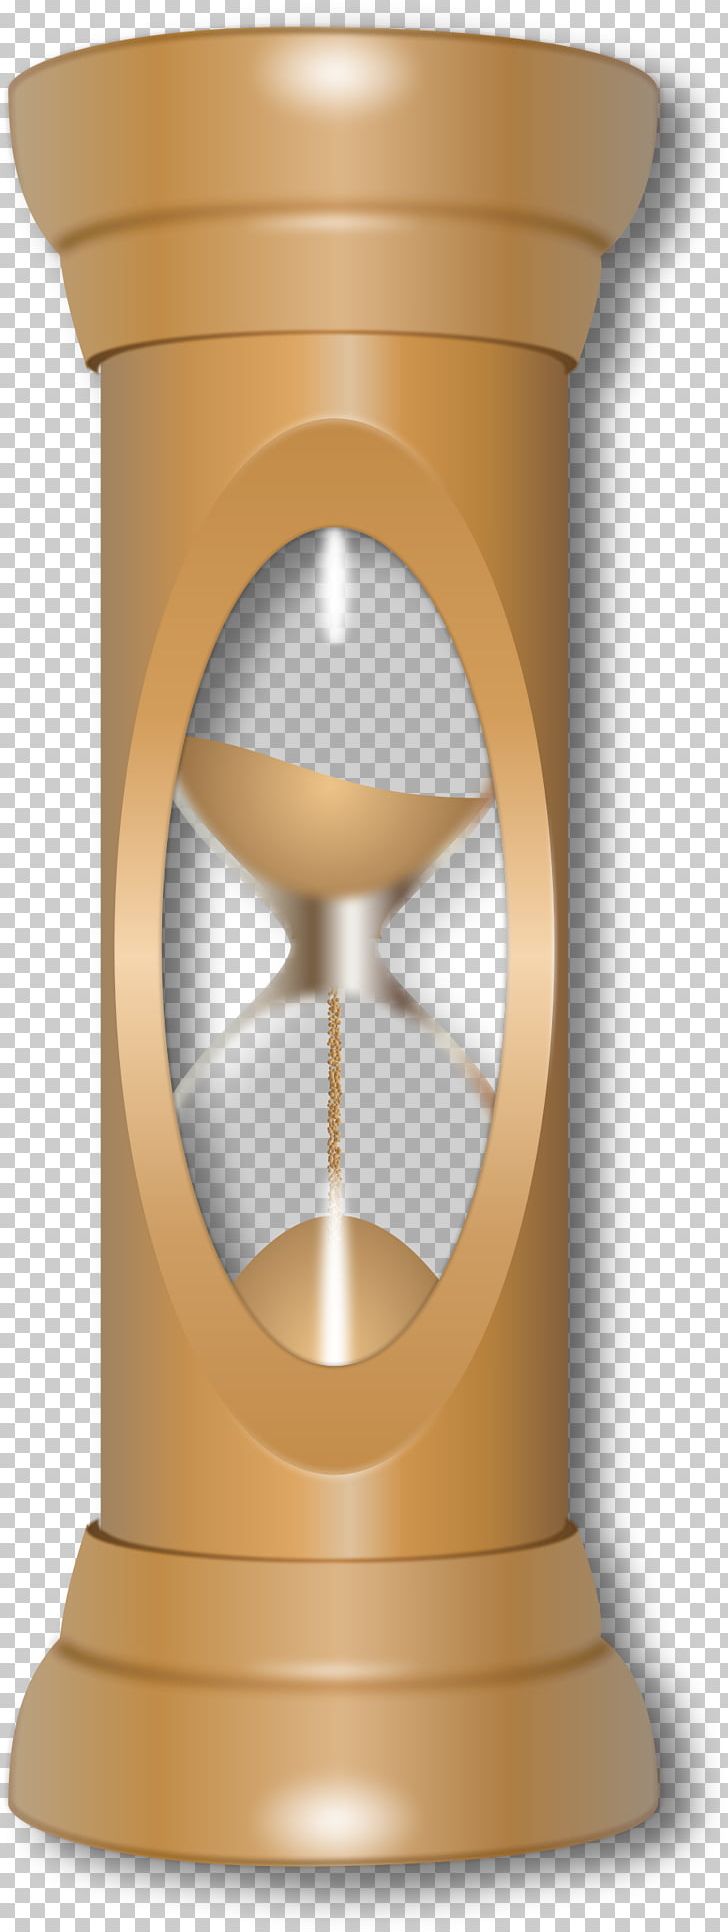 Hourglass Time & Attendance Clocks Computer Icons PNG, Clipart, Clock, Computer Icons, Education Science, Era, Future Free PNG Download